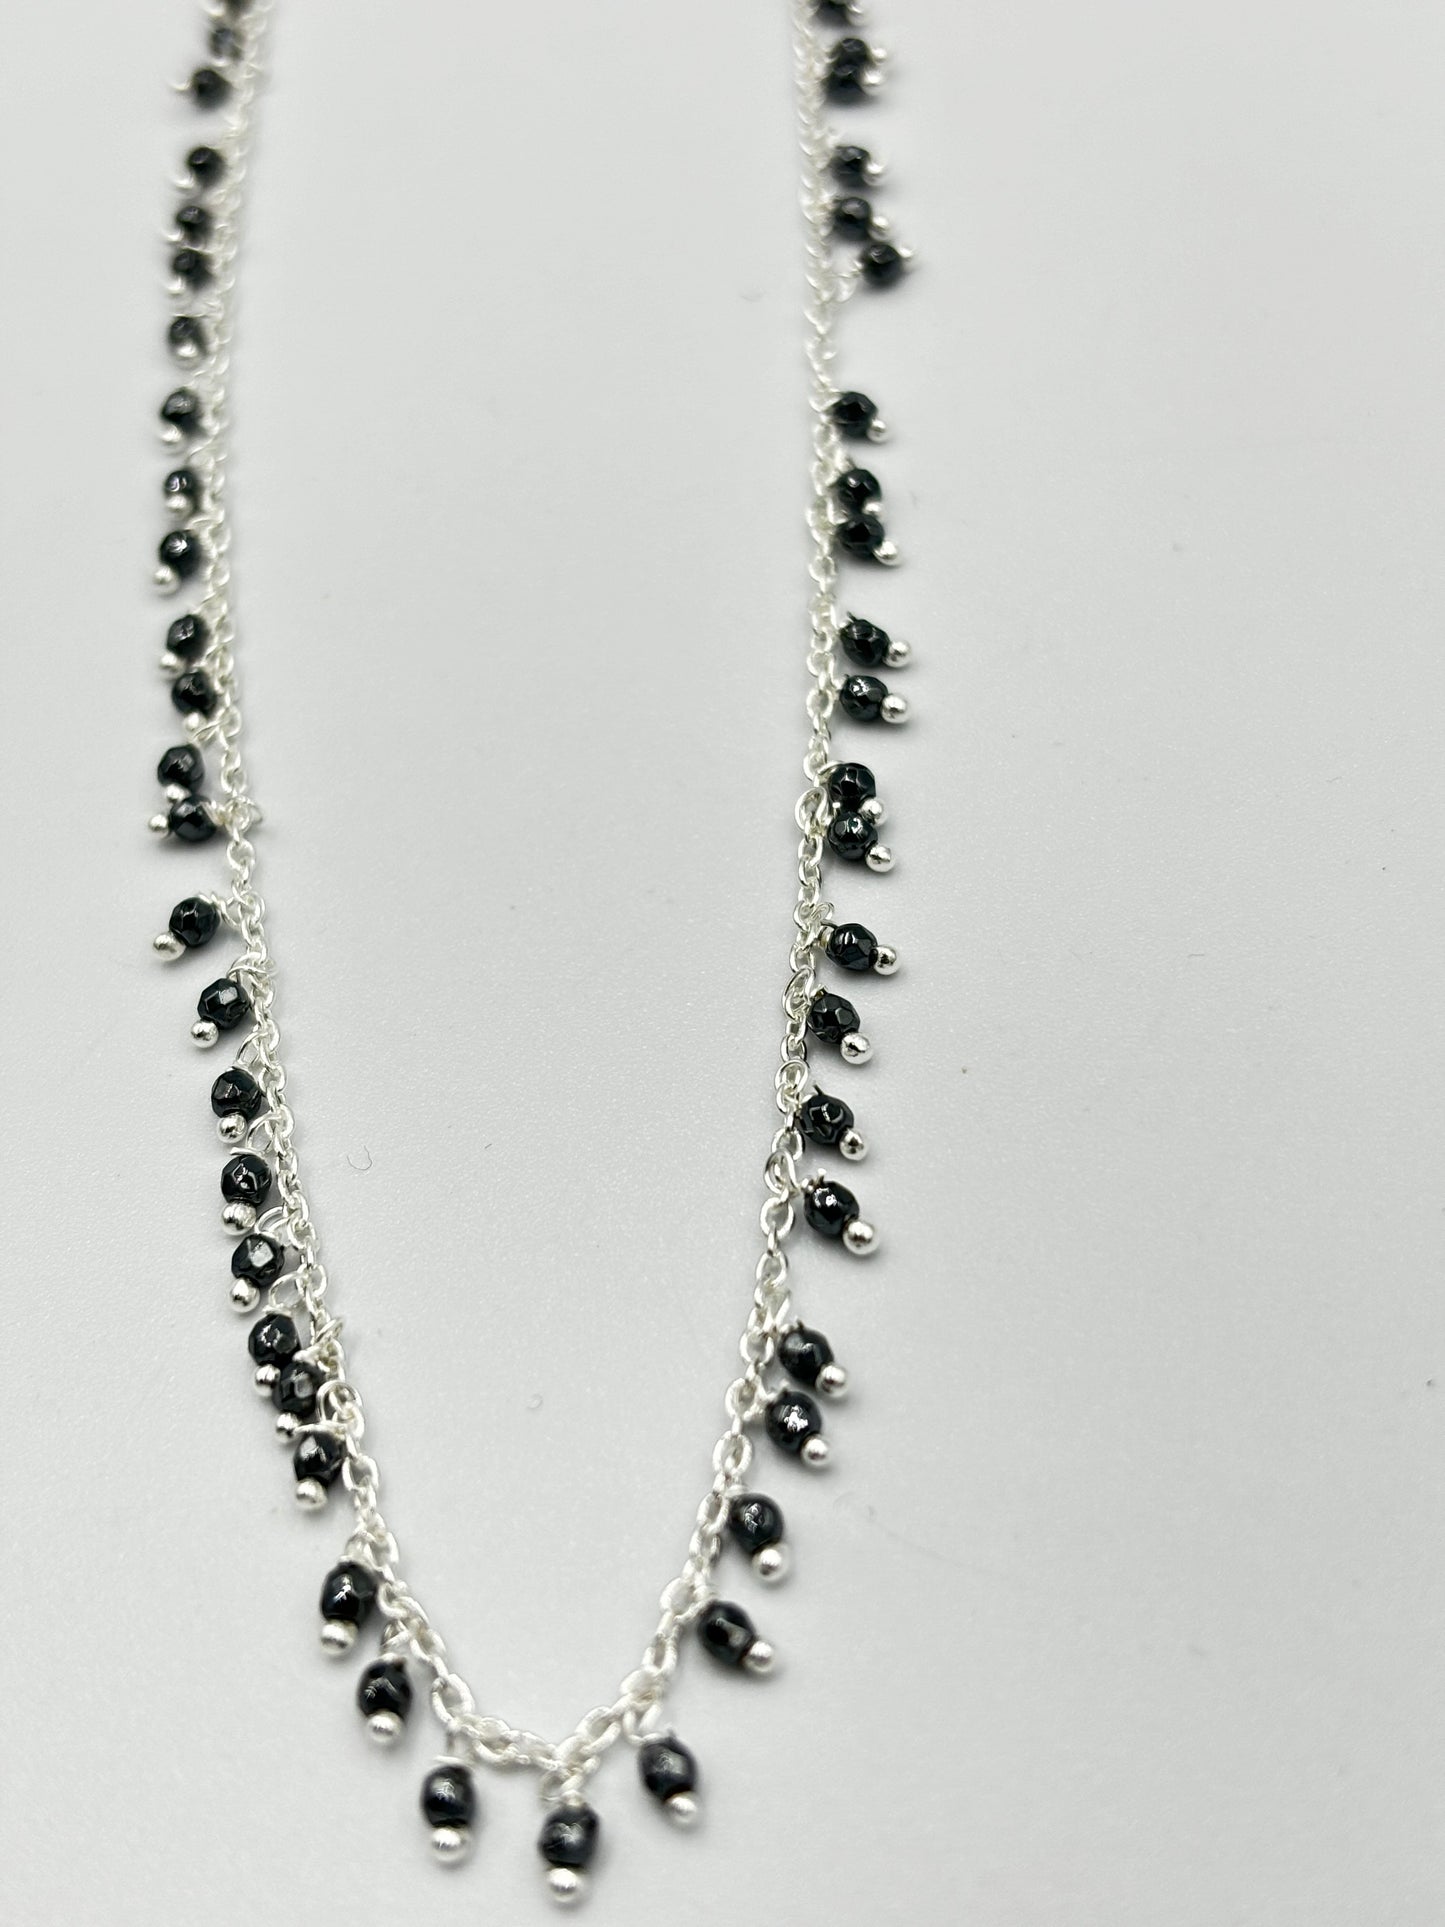 Sterling silver necklace with lots of hematite semi precious stones dangling on it